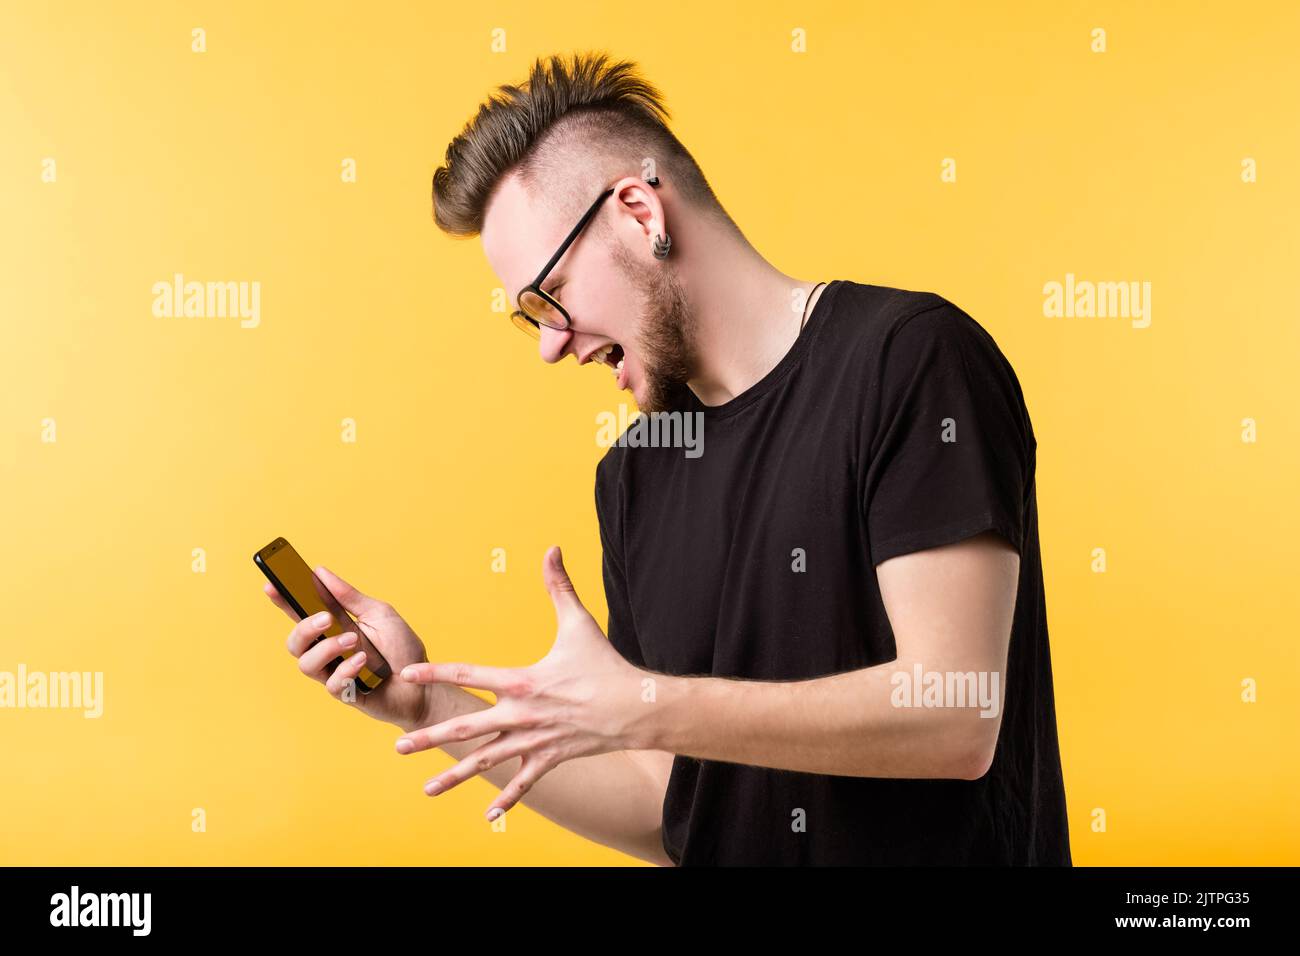 wtf young man screaming smartphone grimacing Stock Photo